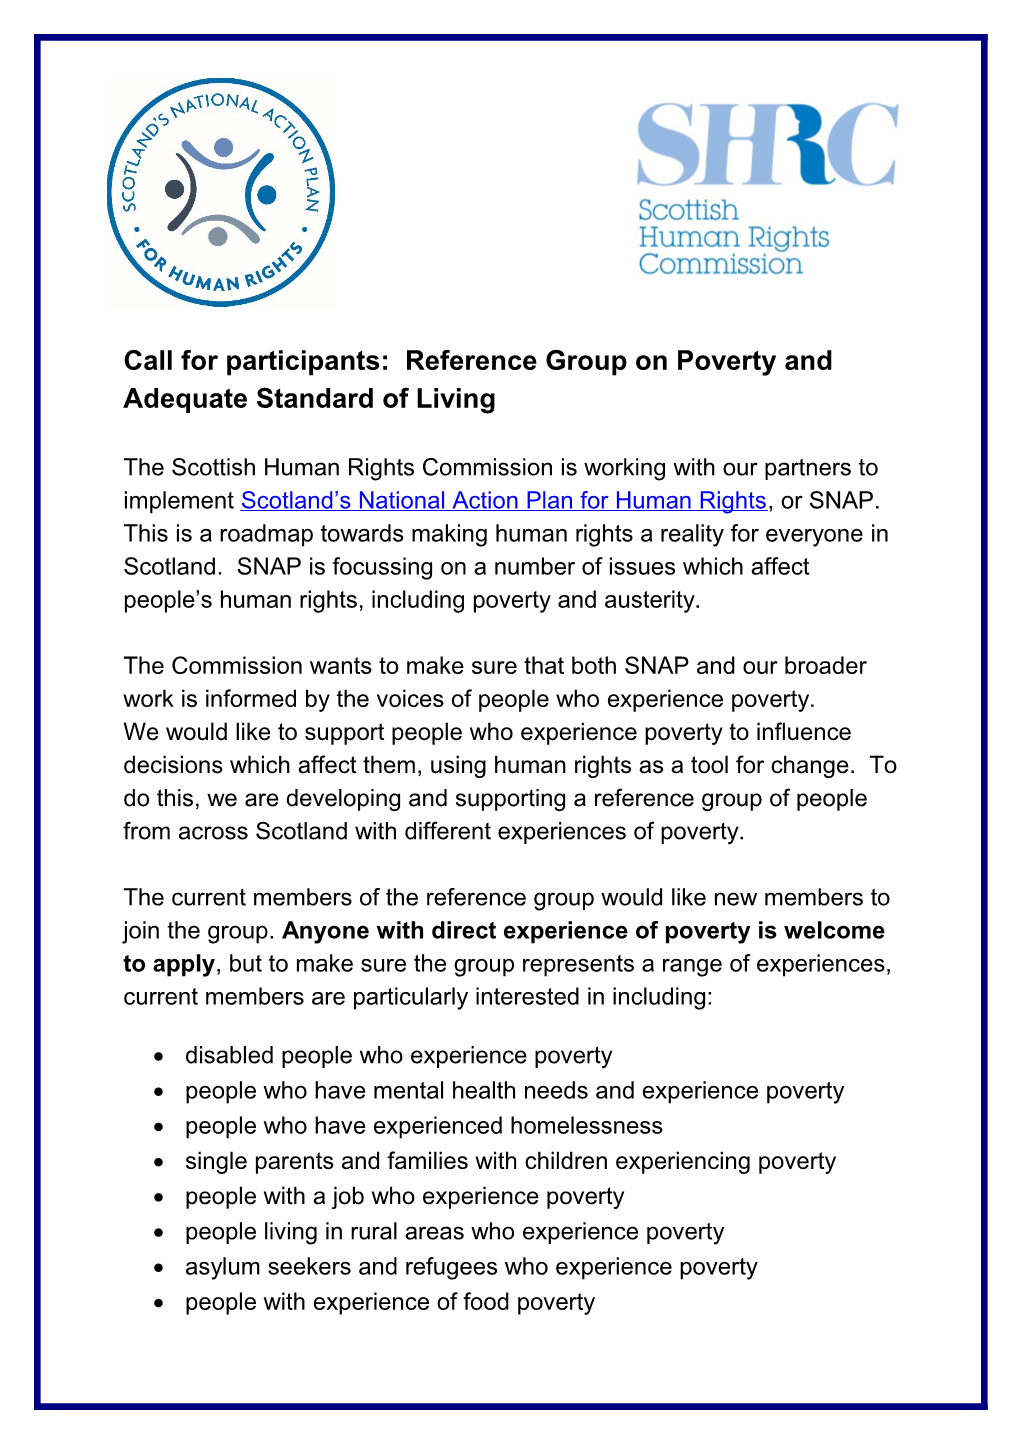 Call for Participants: Reference Group on Poverty and Adequate Standard of Living